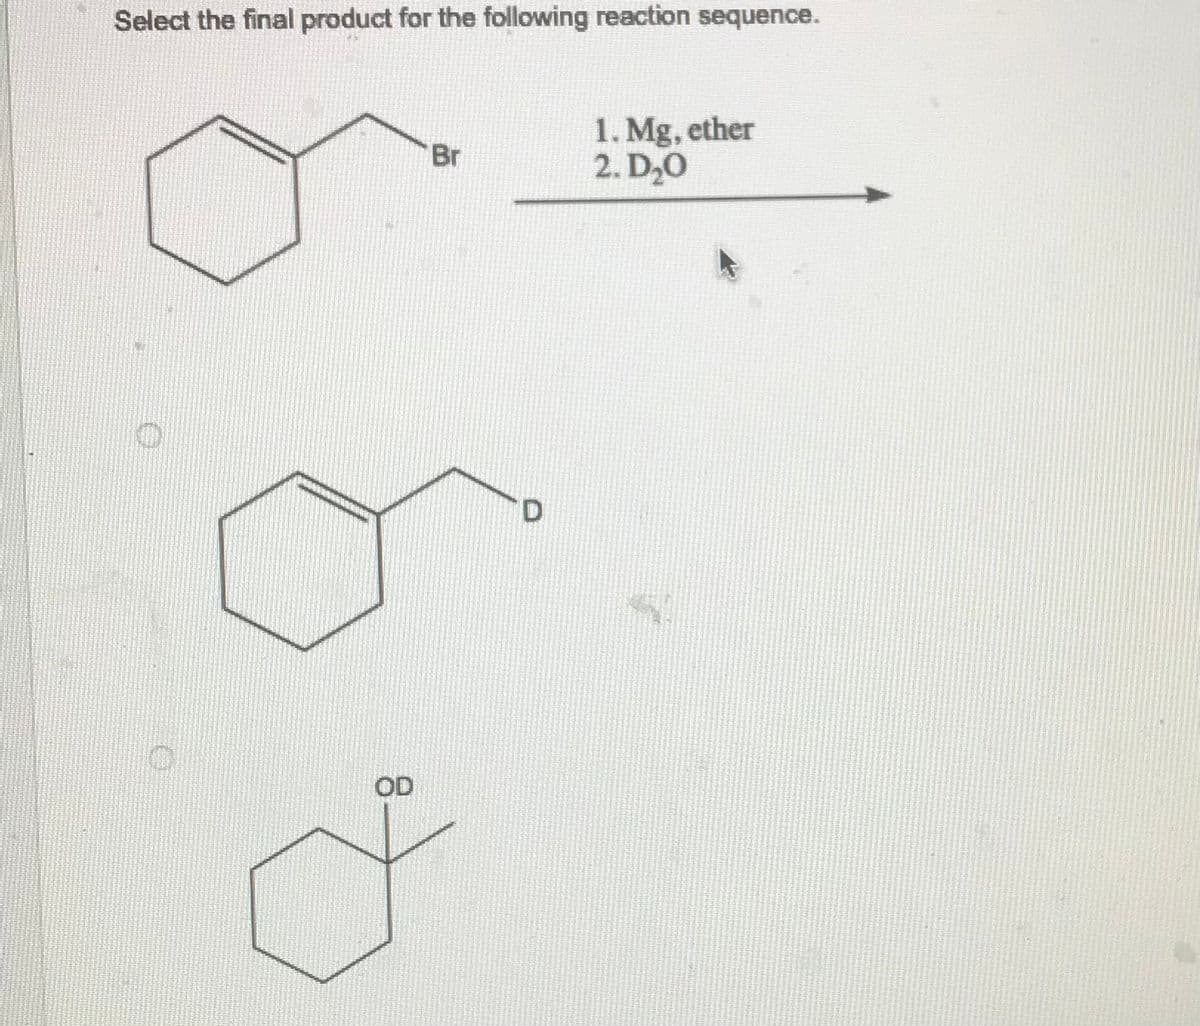 Select the final product for the following reaction sequence.
OD
Br
D
1. Mg, ether
2. D₂0